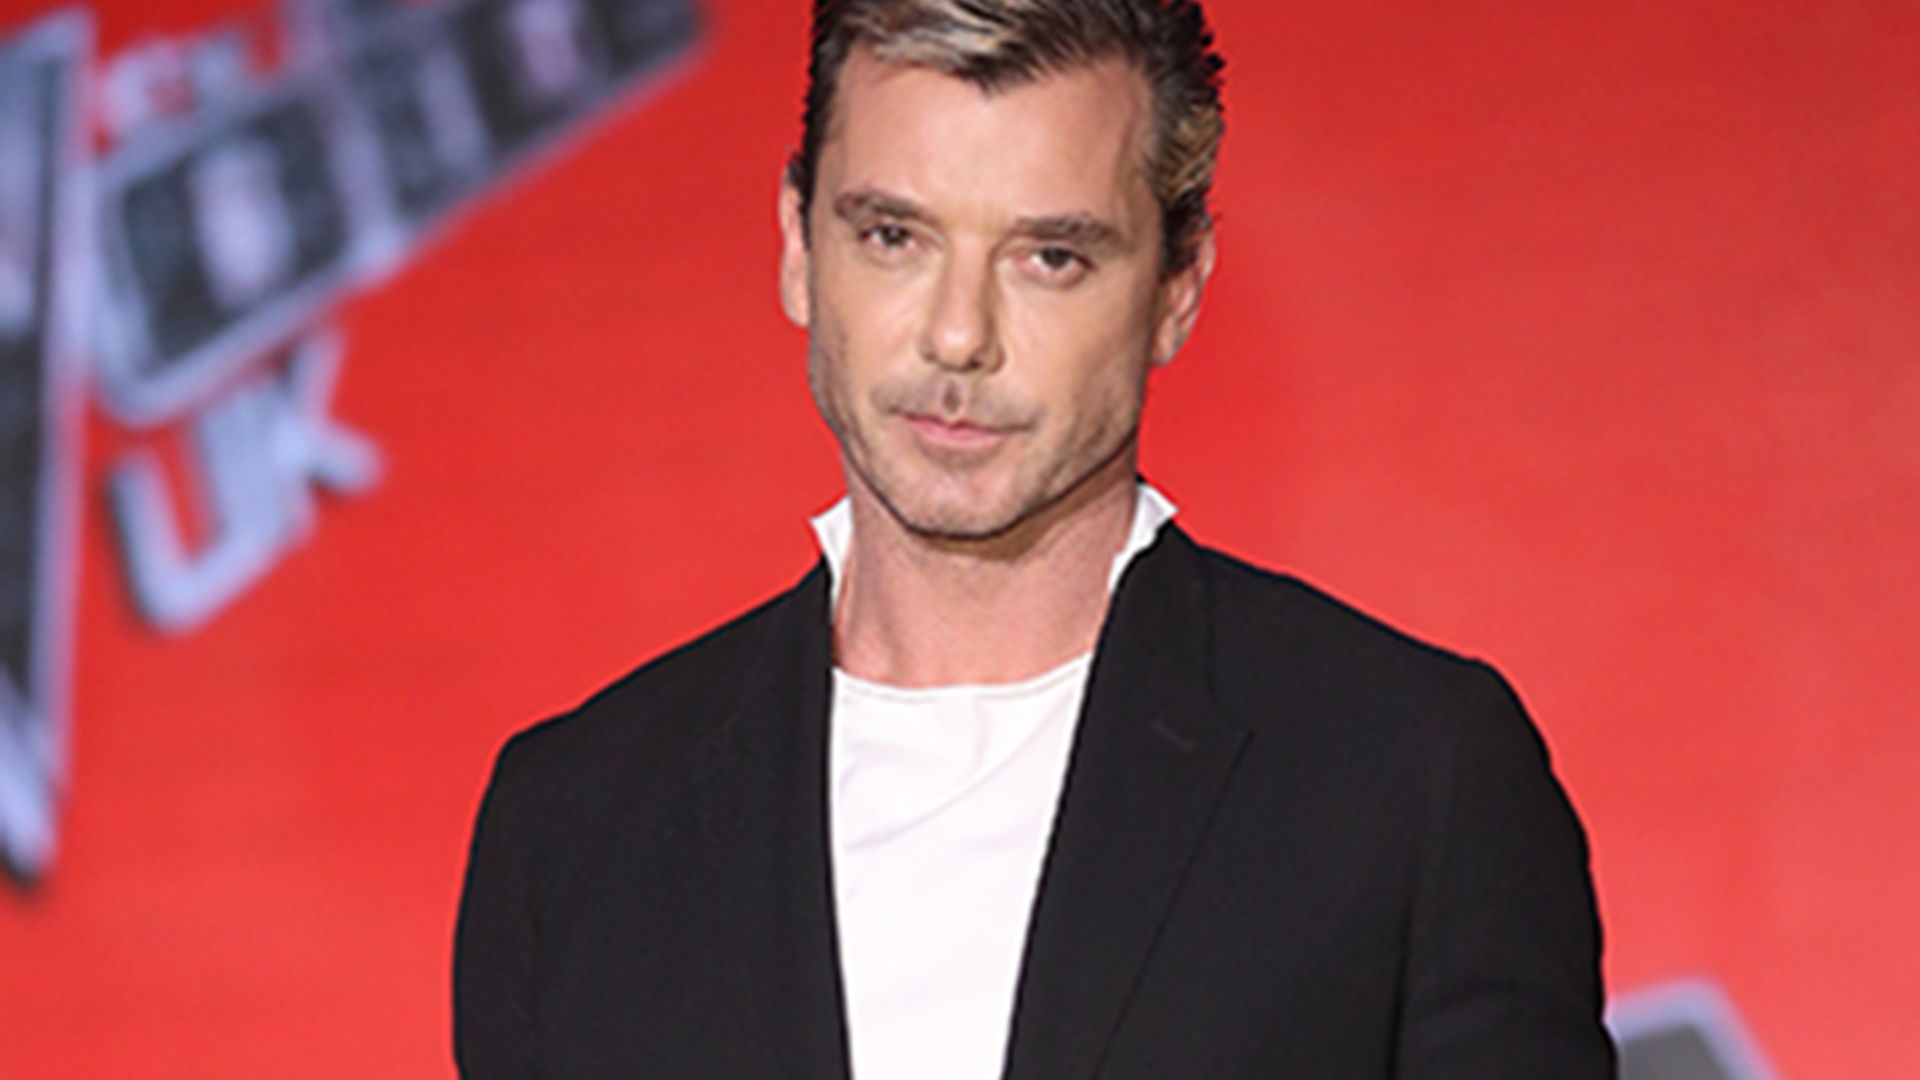 Gavin Rossdale spotted kissing rumoured new girlfriend Sophia Thomalla ahead of The Voice final